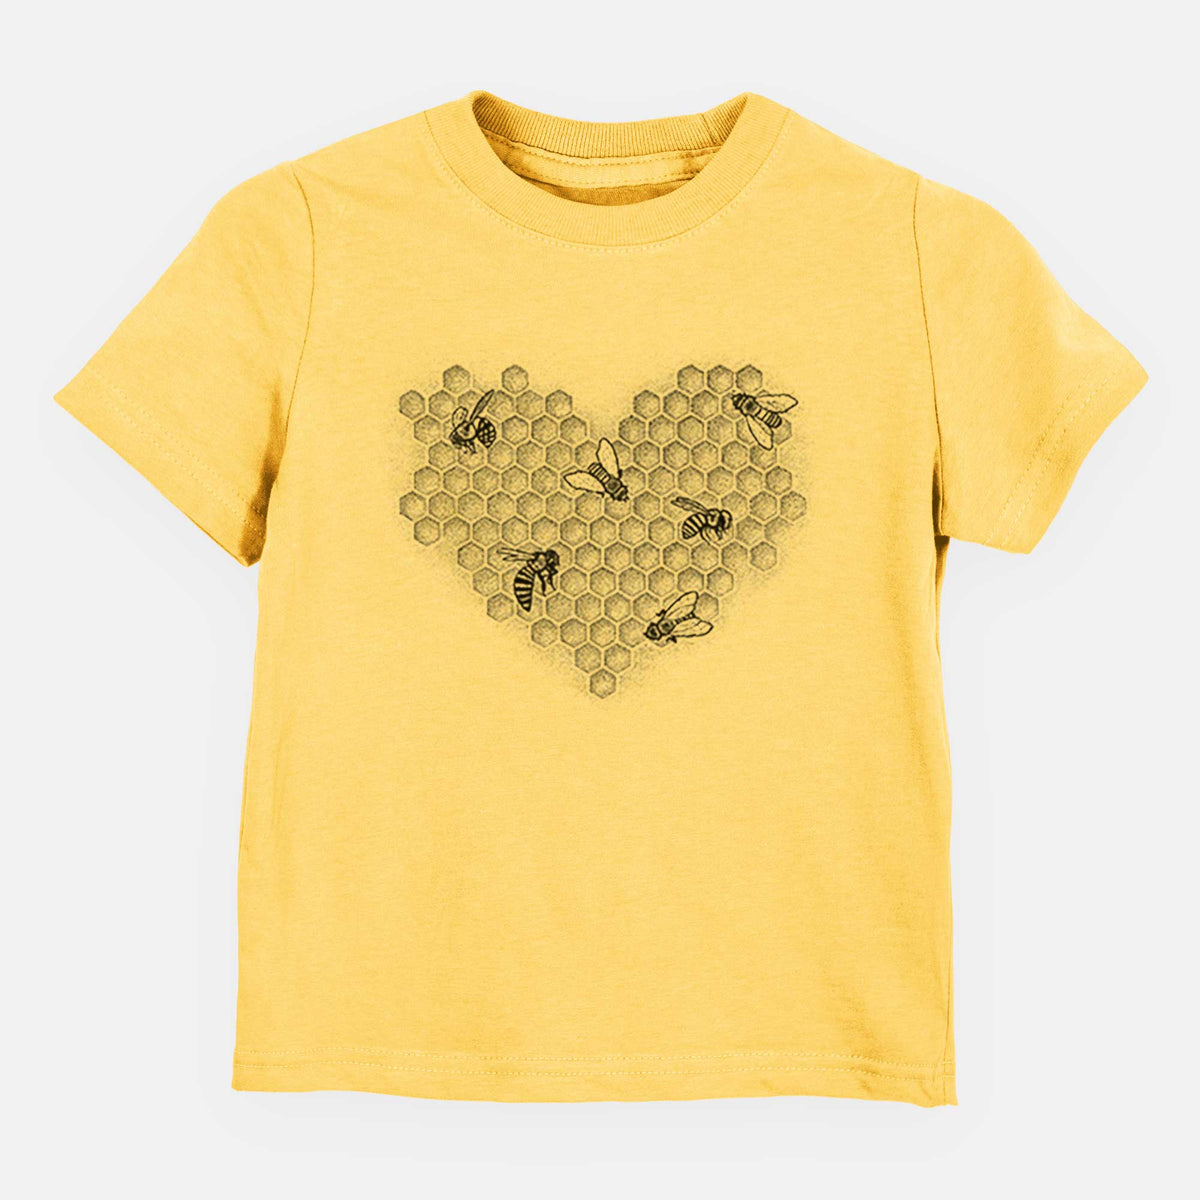 Honeycomb Heart with Bees - Kids Shirt